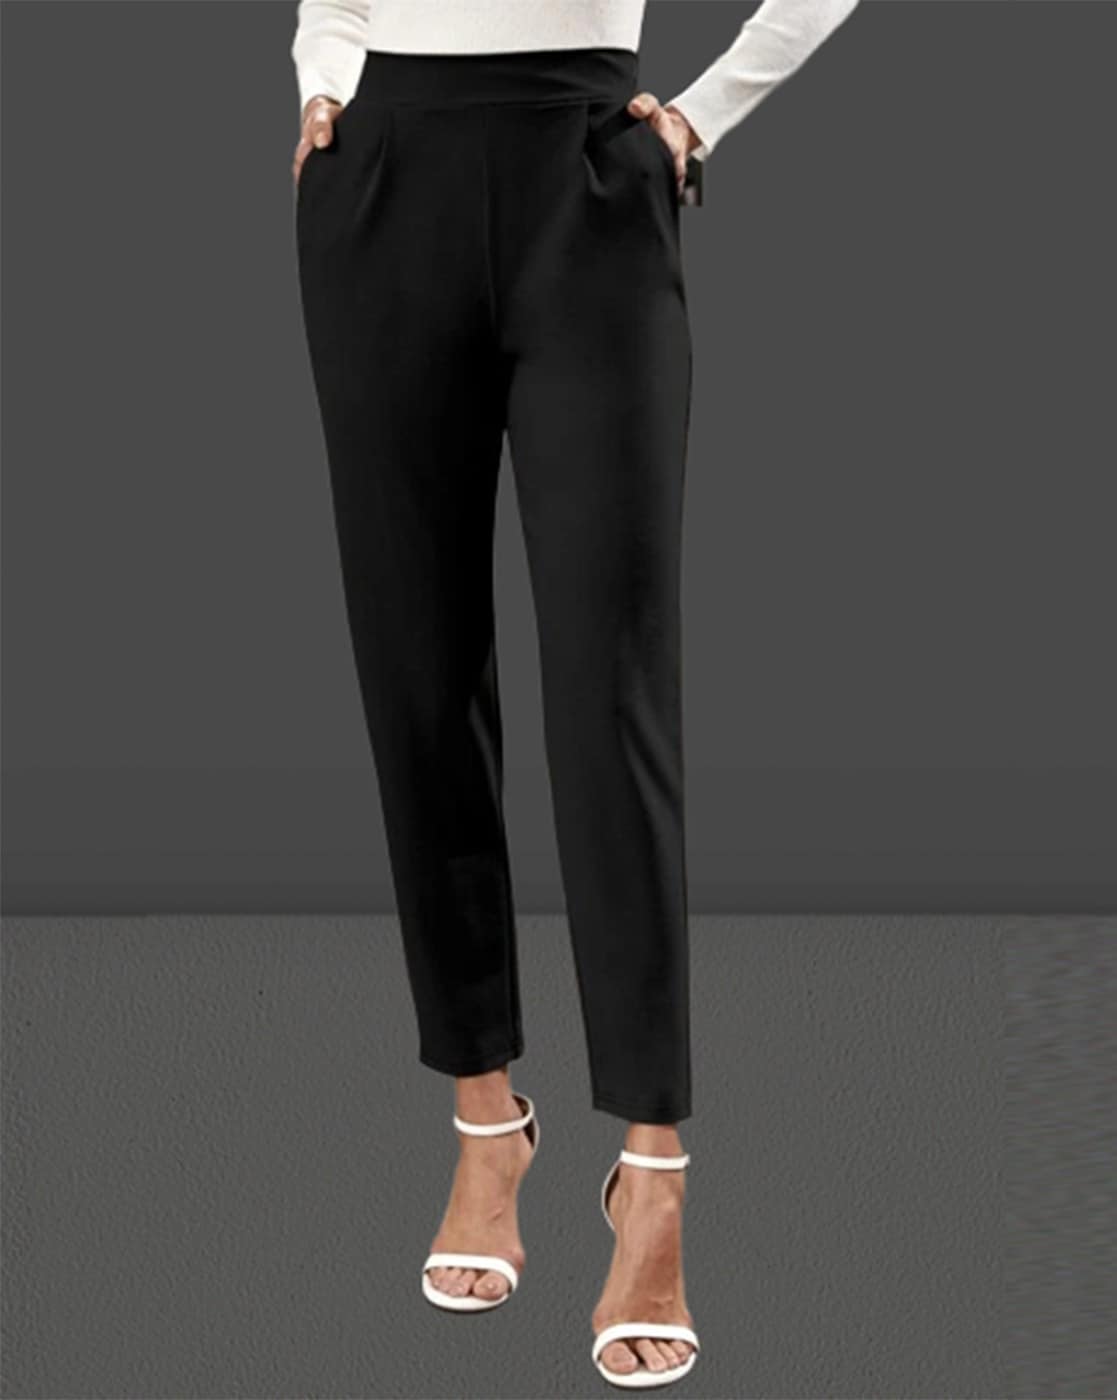 High Waist Womens Pencil Pants 2019 New Casual Formal Office Trousers For  Ladies For Office And Work Wear From Donnatang240965, $27.64 | DHgate.Com